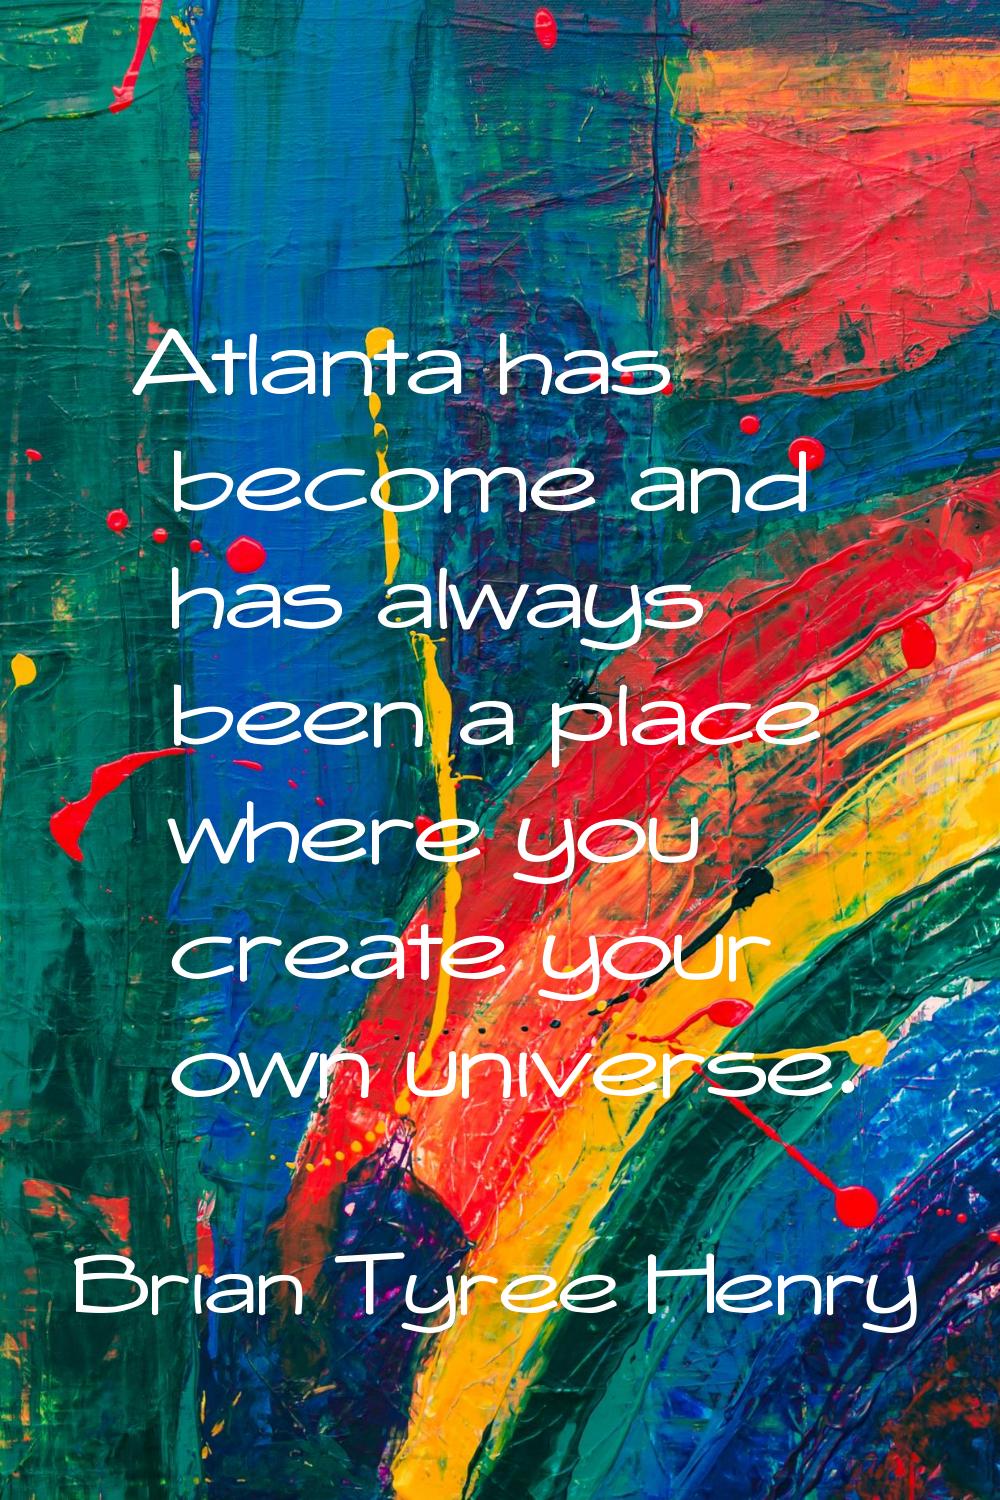 Atlanta has become and has always been a place where you create your own universe.